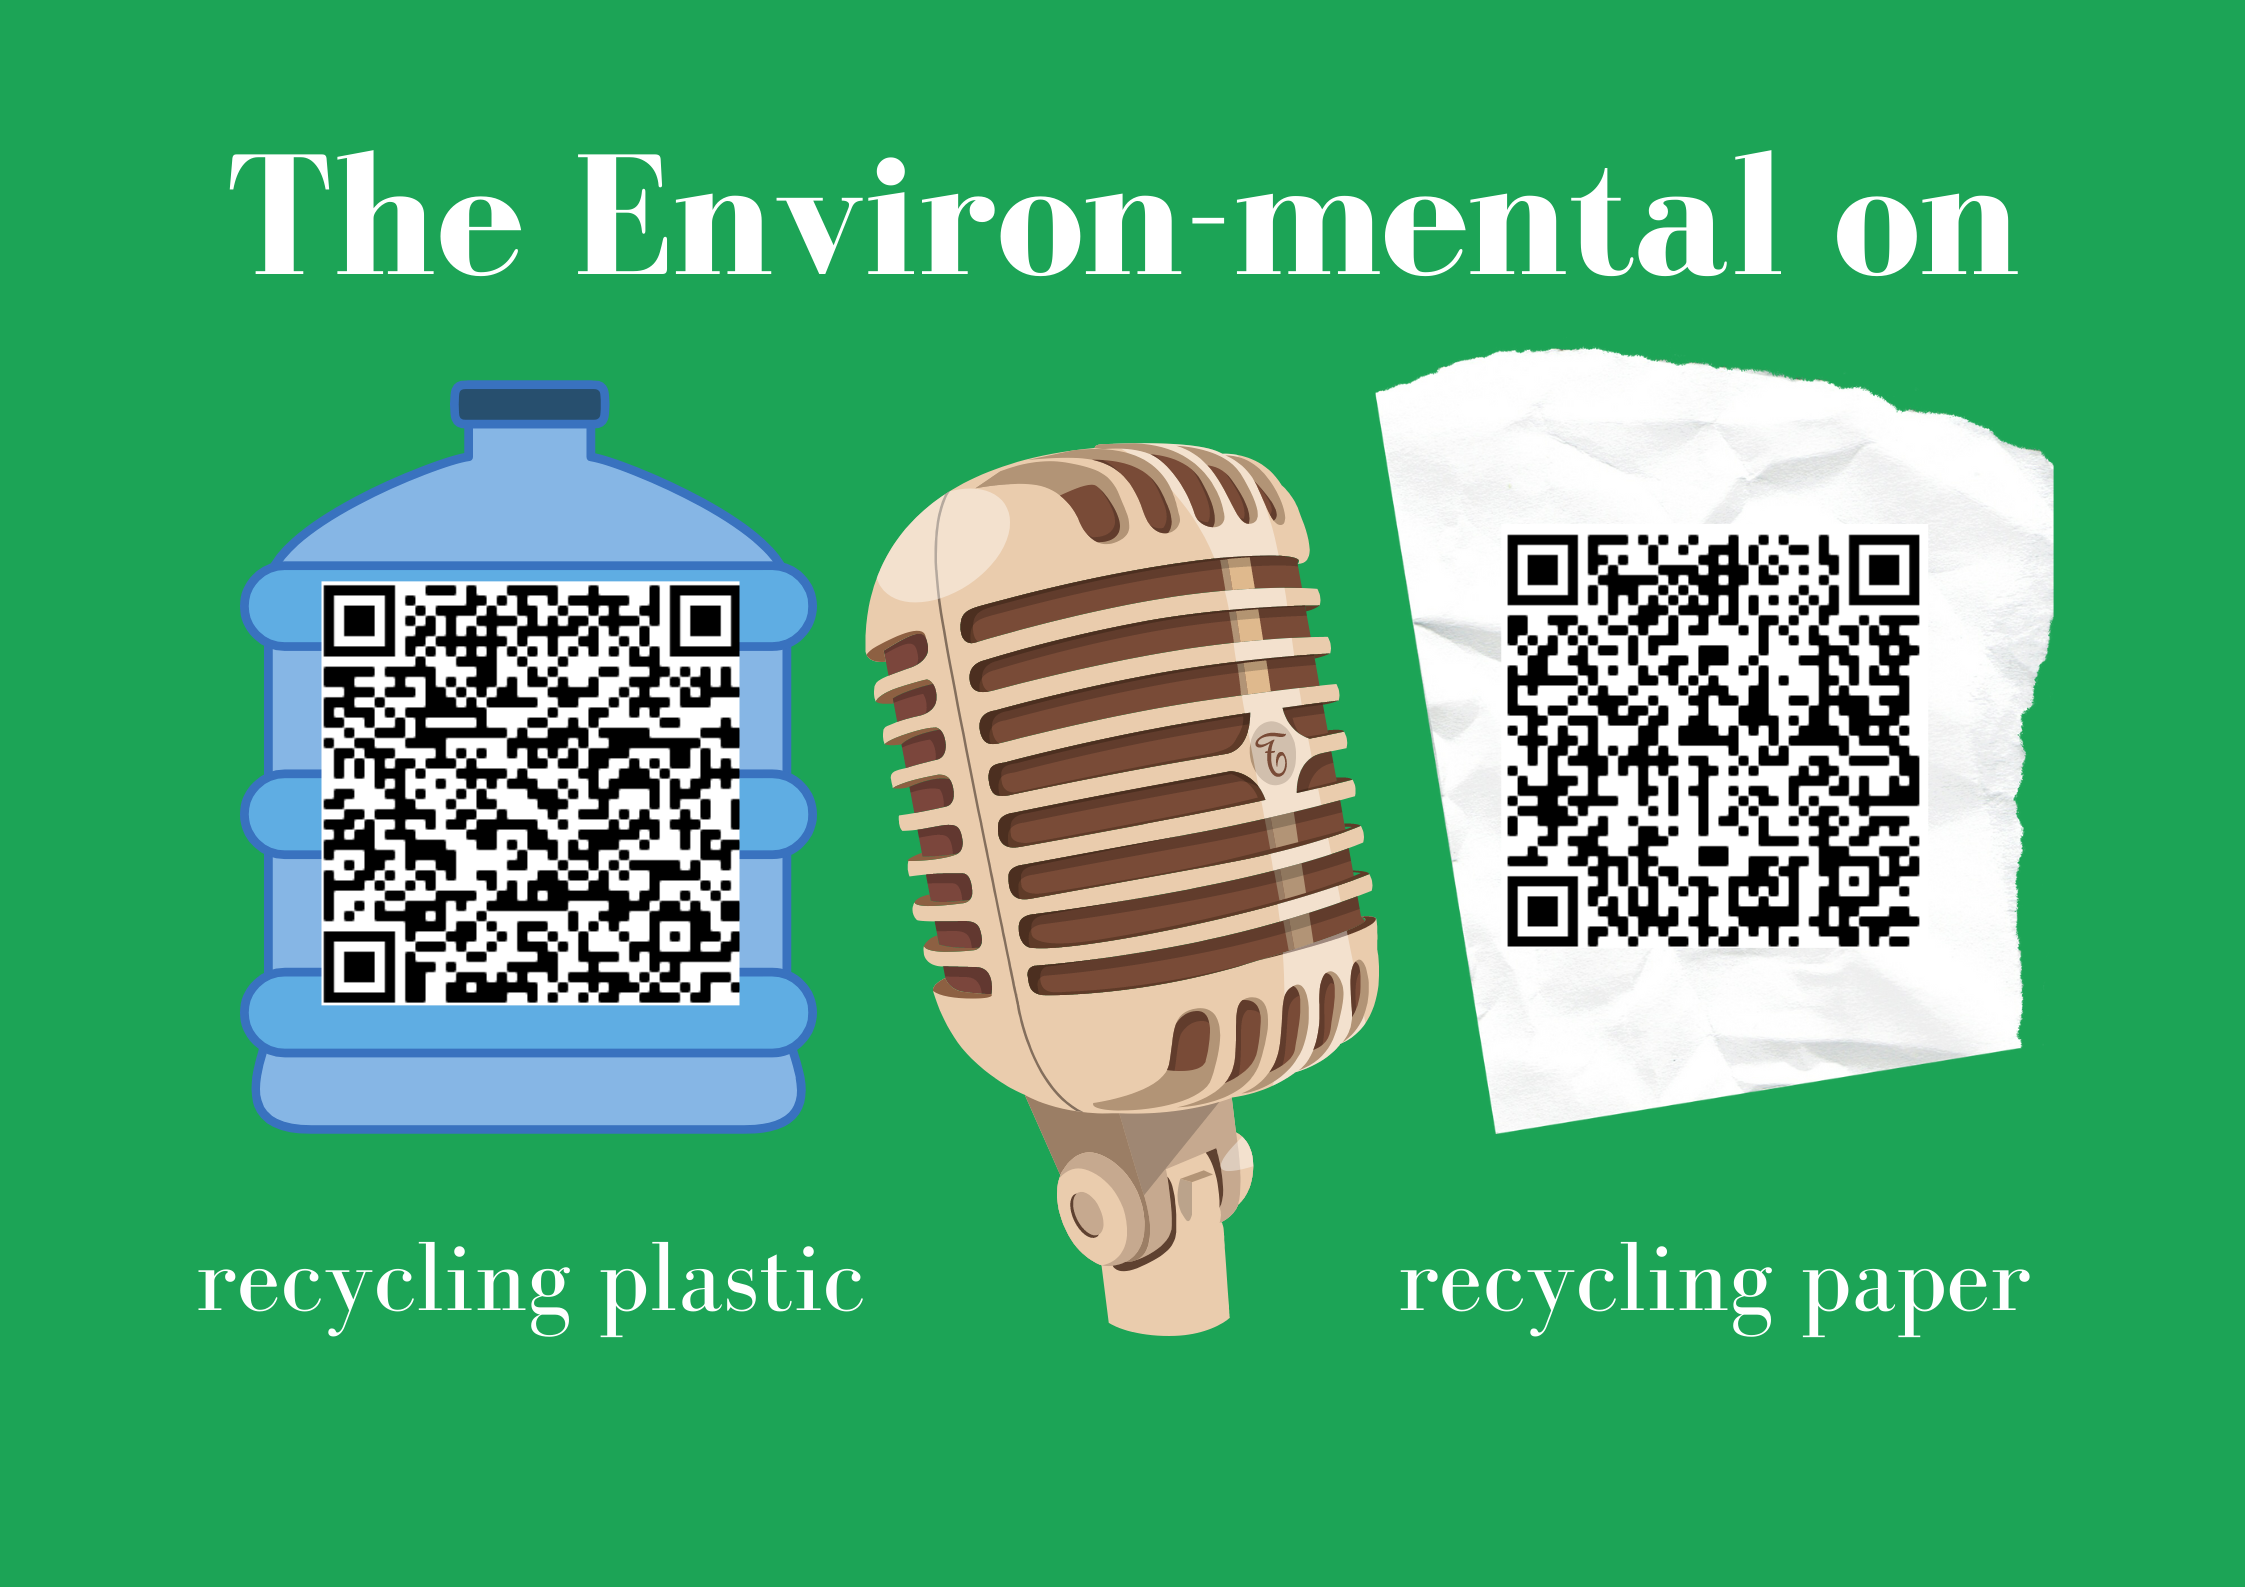 Poster with QR codes. Graphics of a water jug, microphone, and a piece of paper. Text reads: The Environ-mental on: recycling plastic, recycling paper.